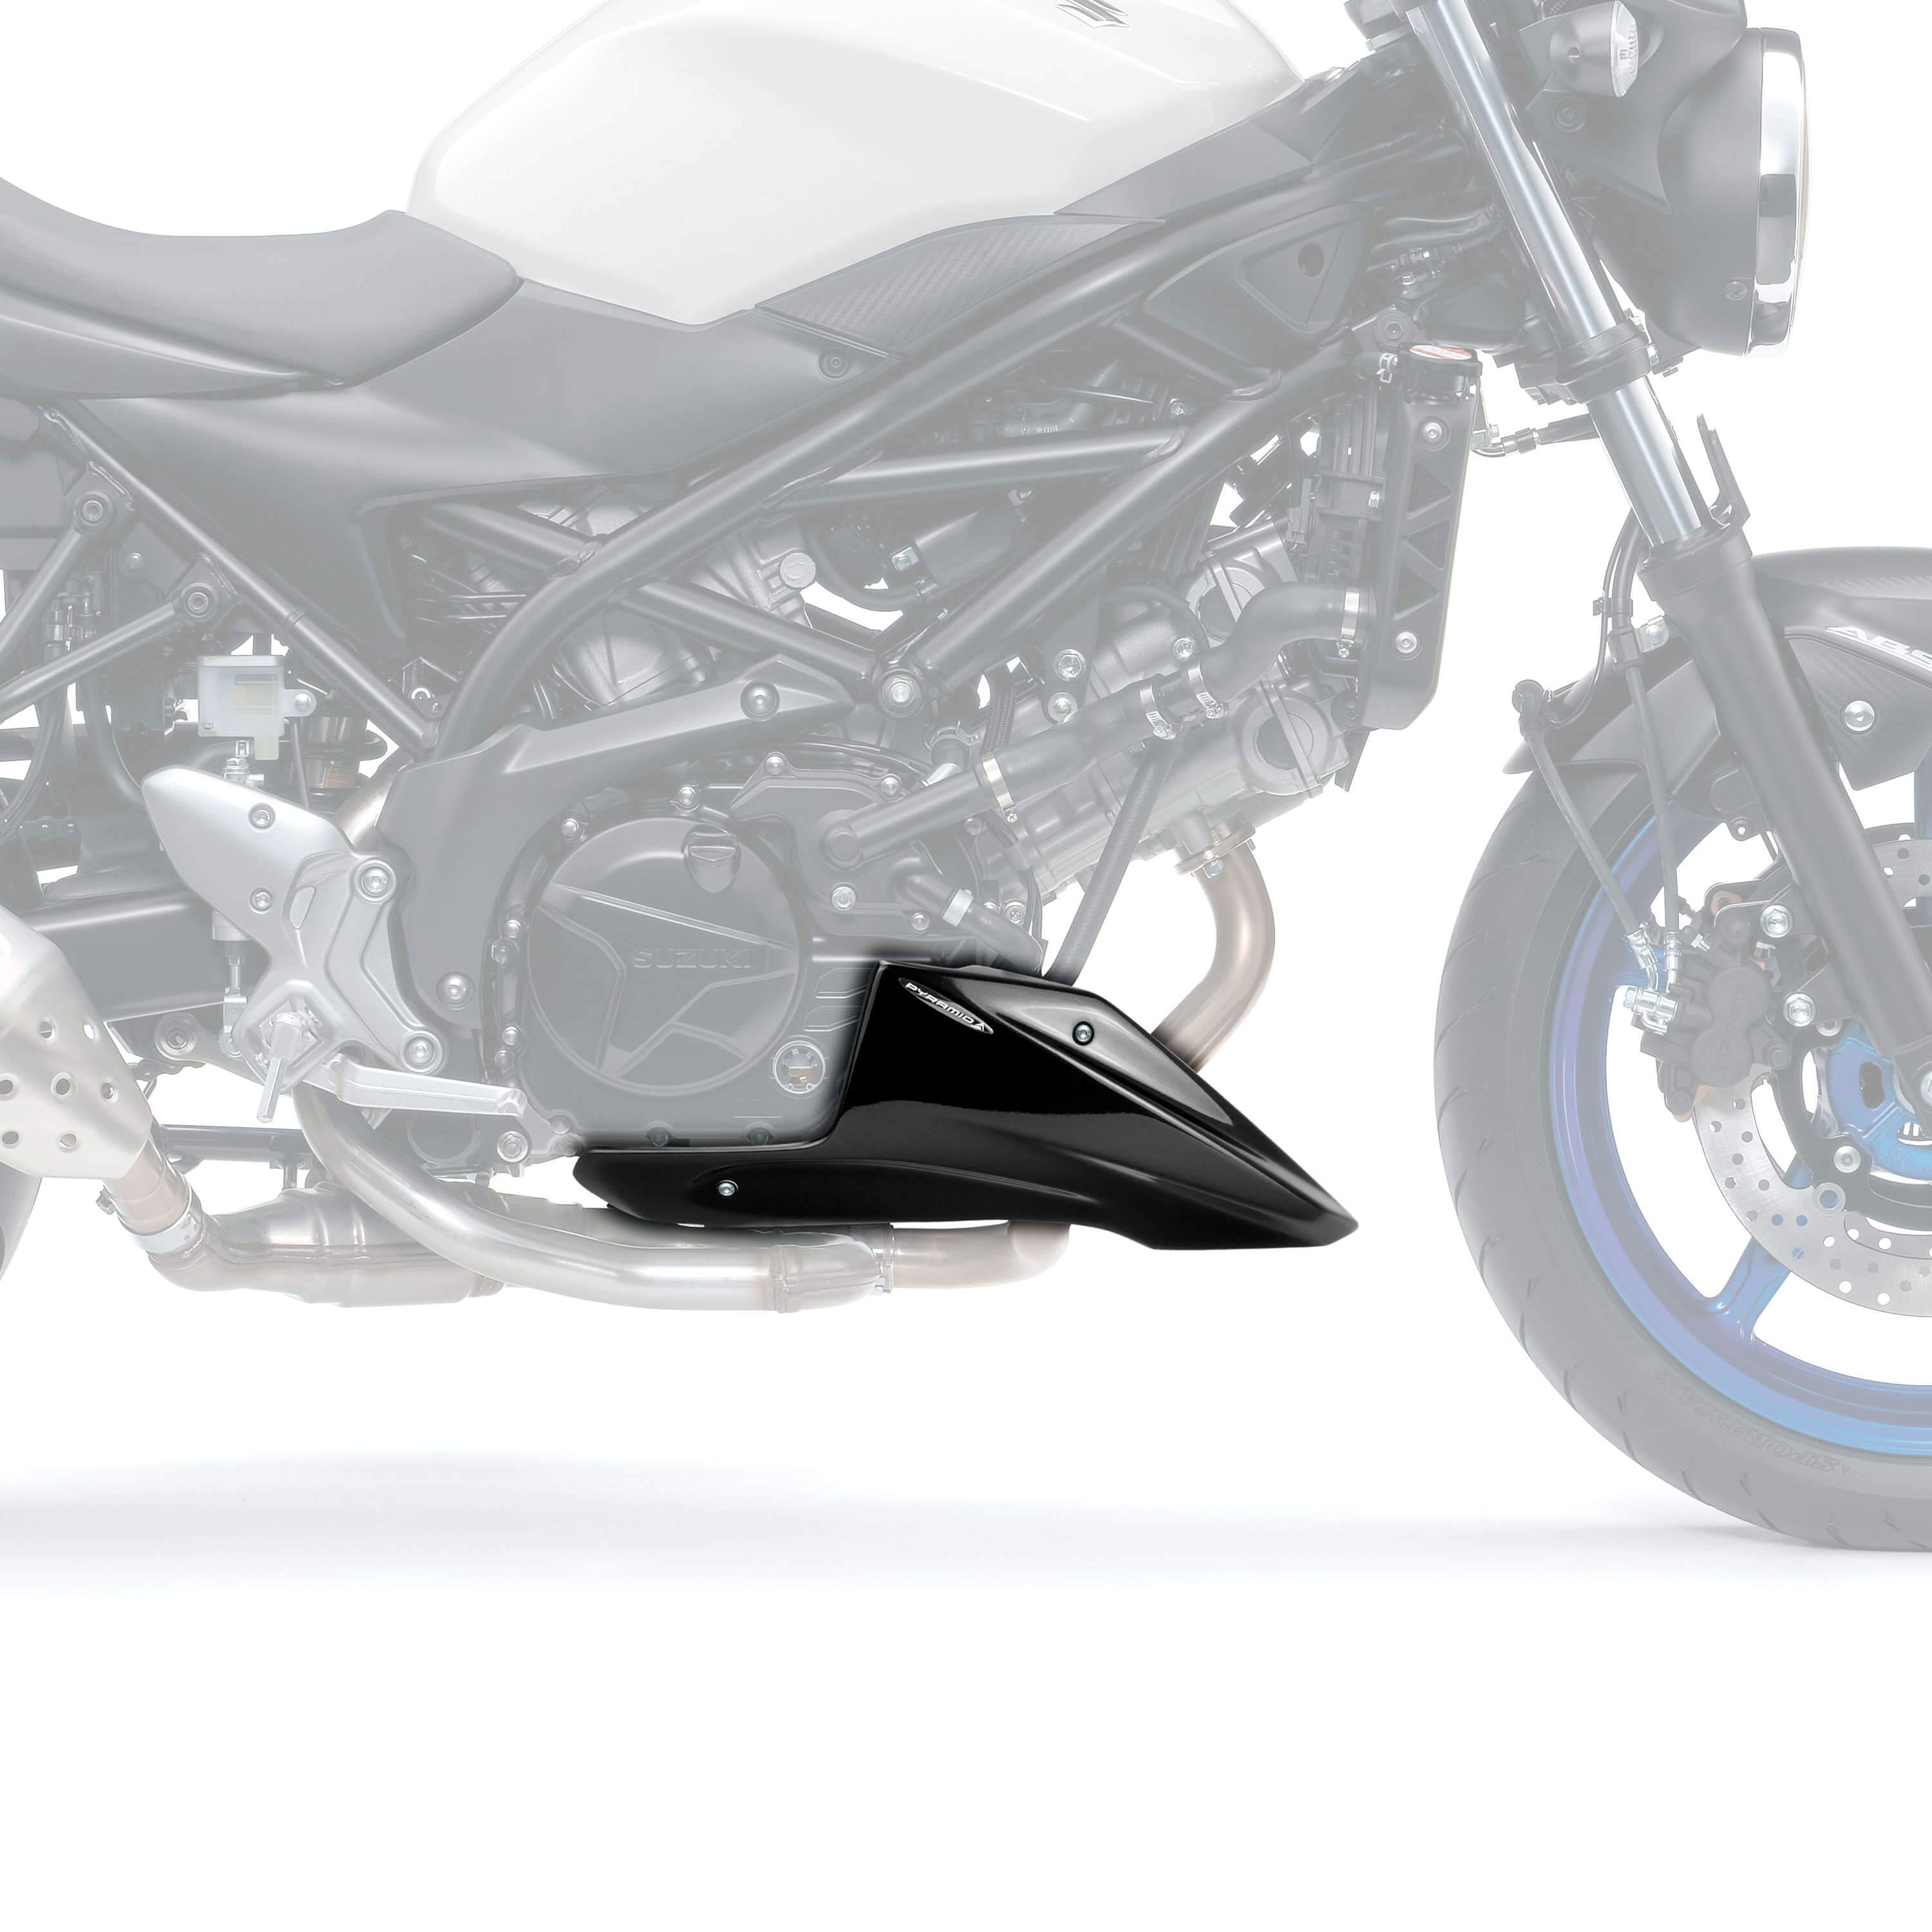 Pyramid Belly Pan | Gloss Black | Suzuki SV650 2016>Current-20681B-Belly Pans-Pyramid Motorcycle Accessories